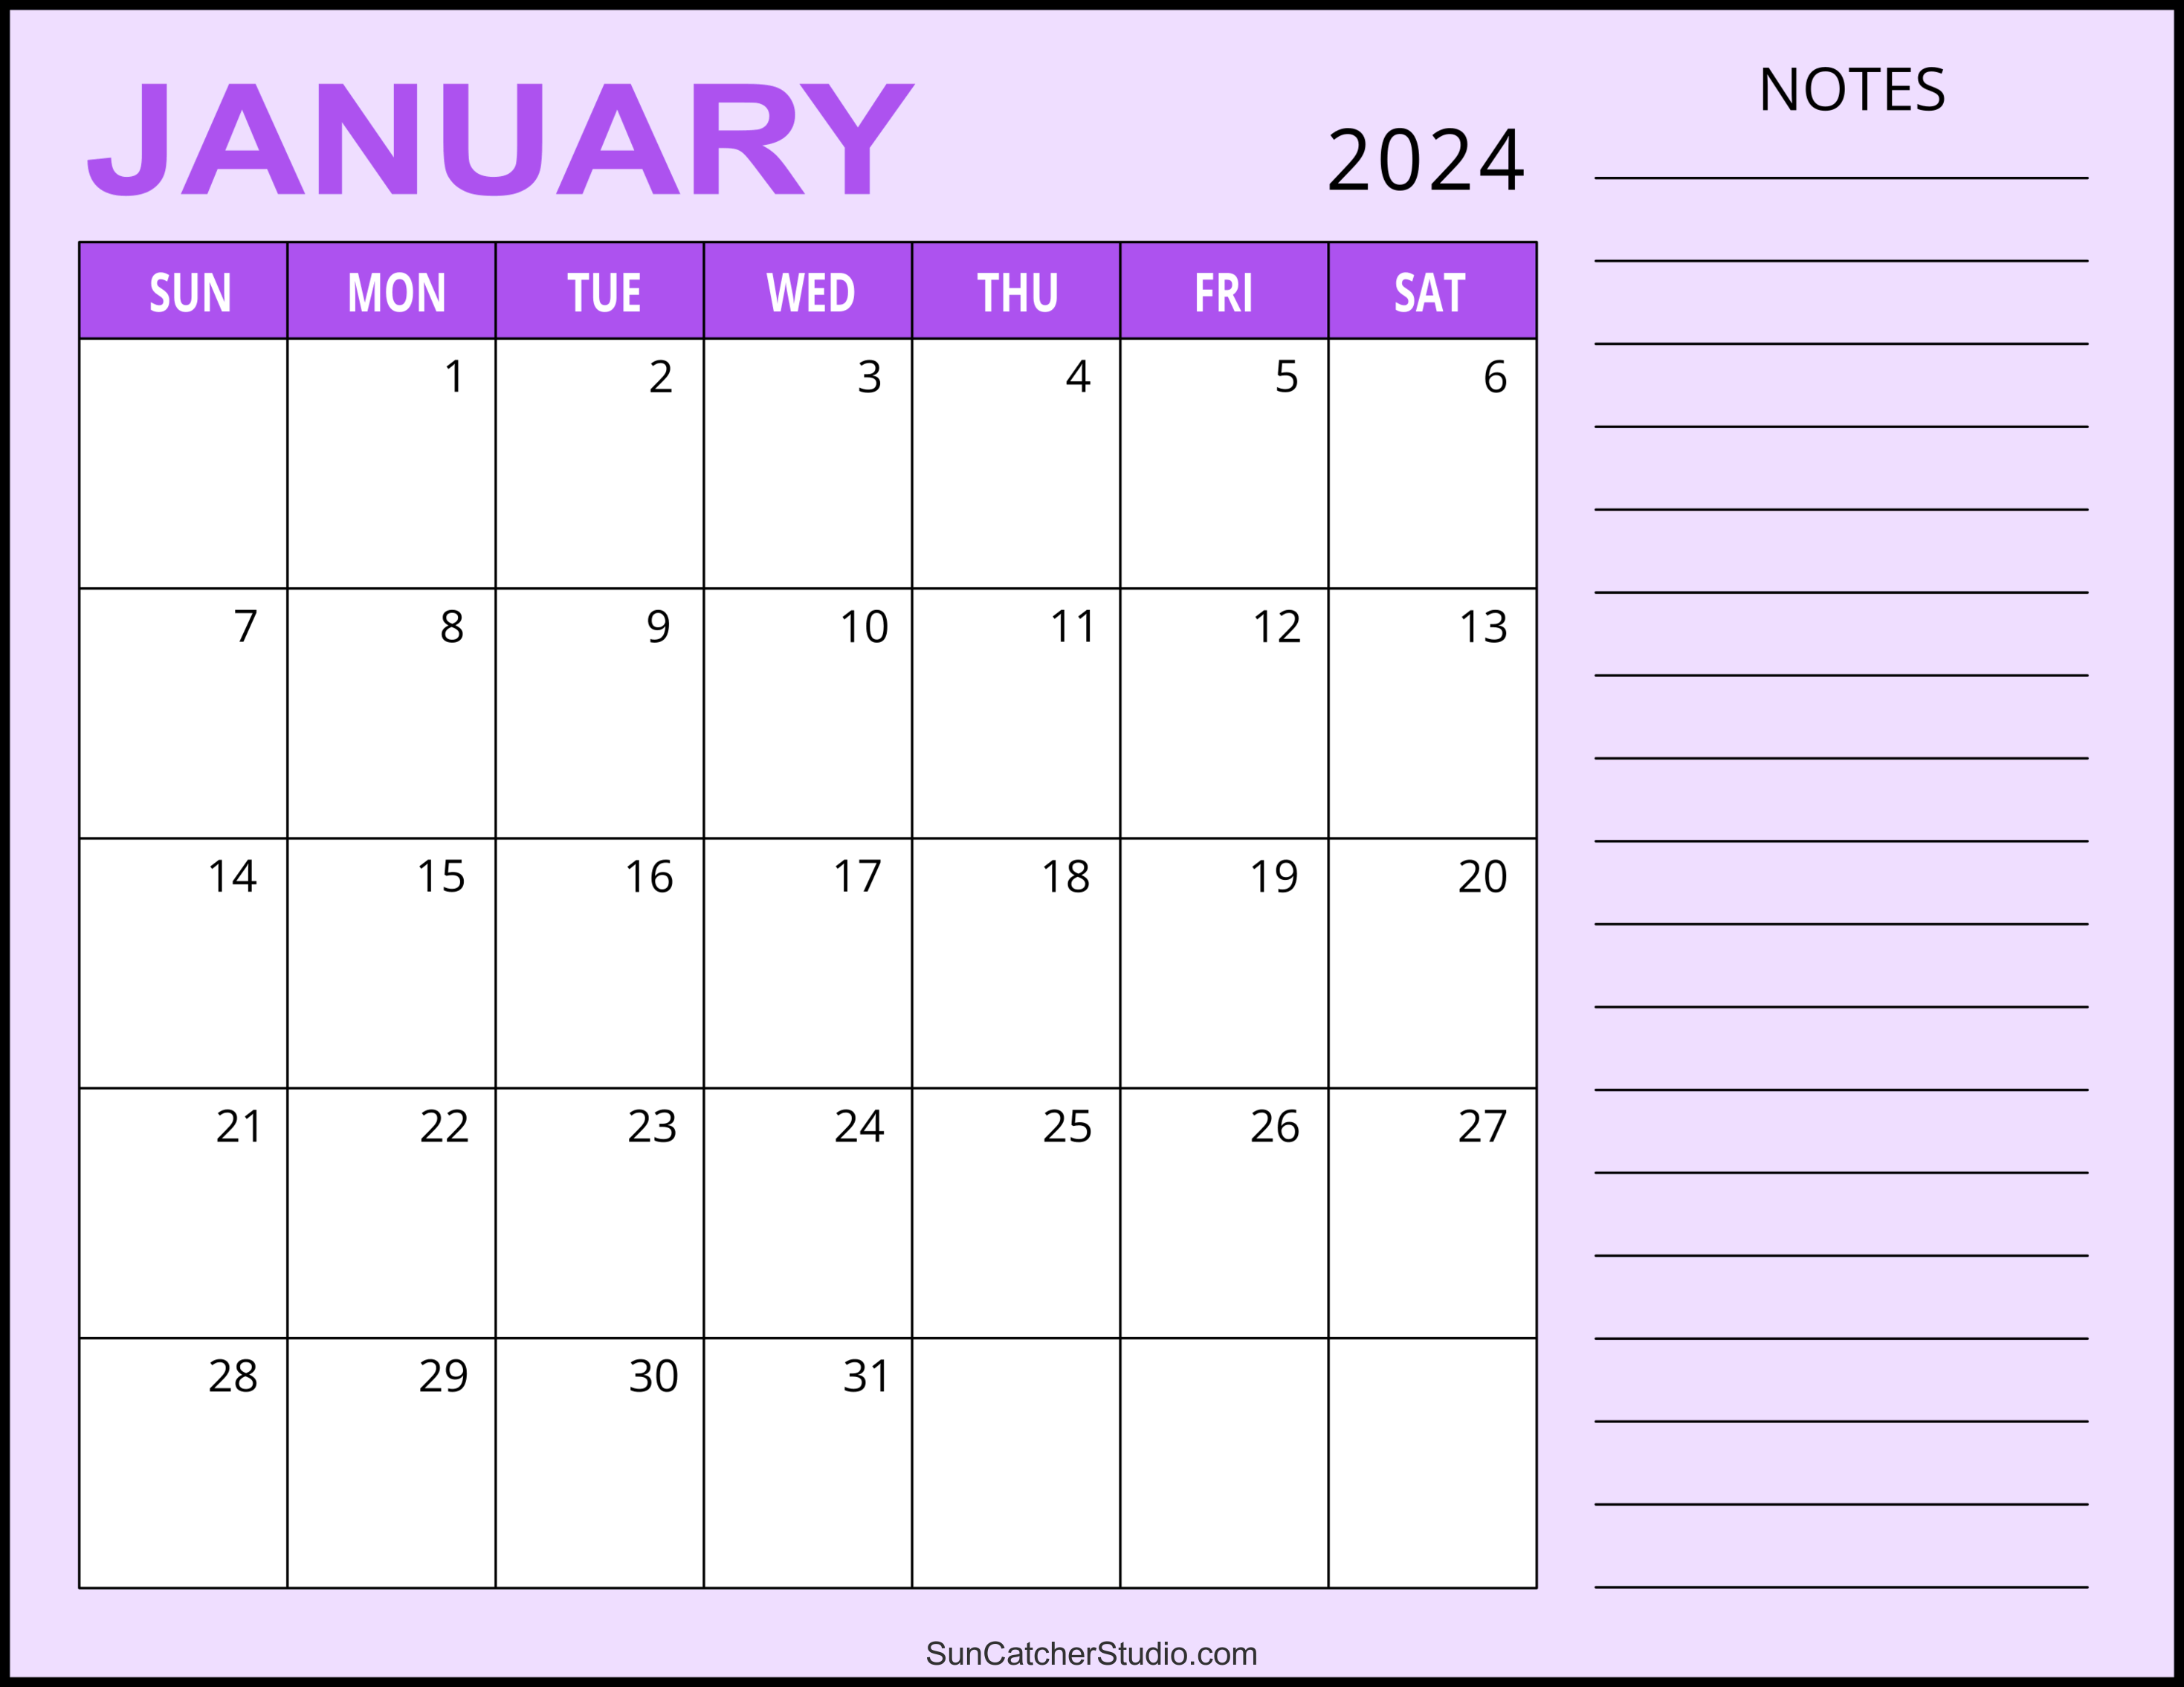 January 2024 Calendar (Free Printable) – Diy Projects, Patterns throughout Free Printable Calendar 2024 Task By Month